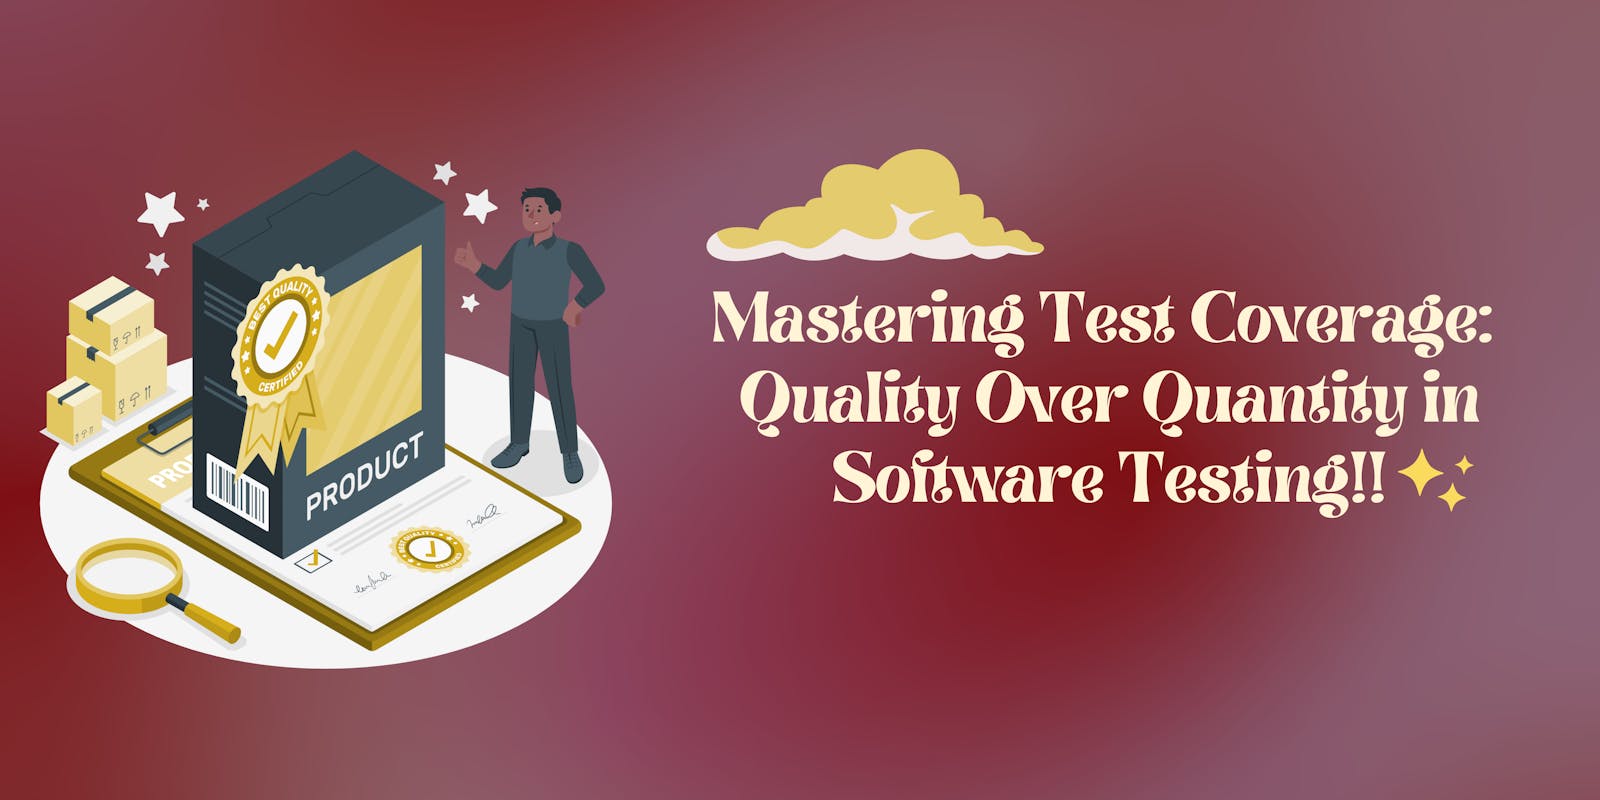 Mastering Test Coverage: Quality Over Quantity in Software Testing!!